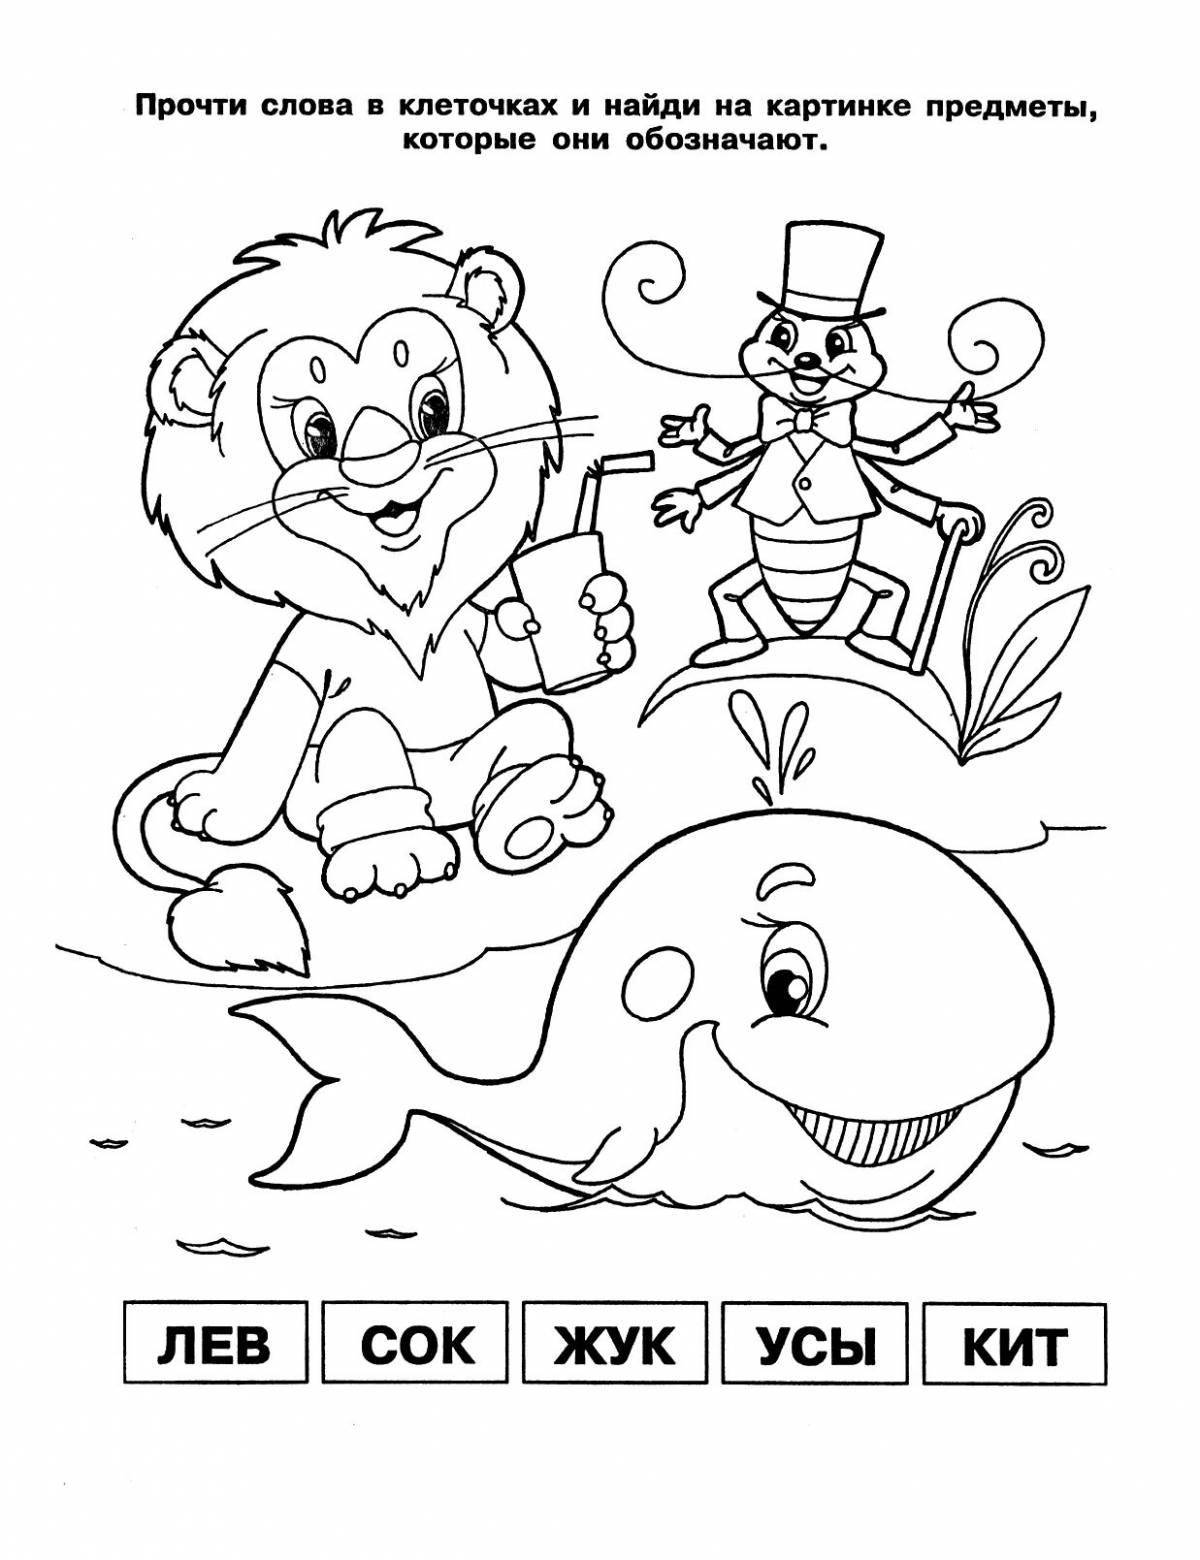 Colorful syllables coloring for minors